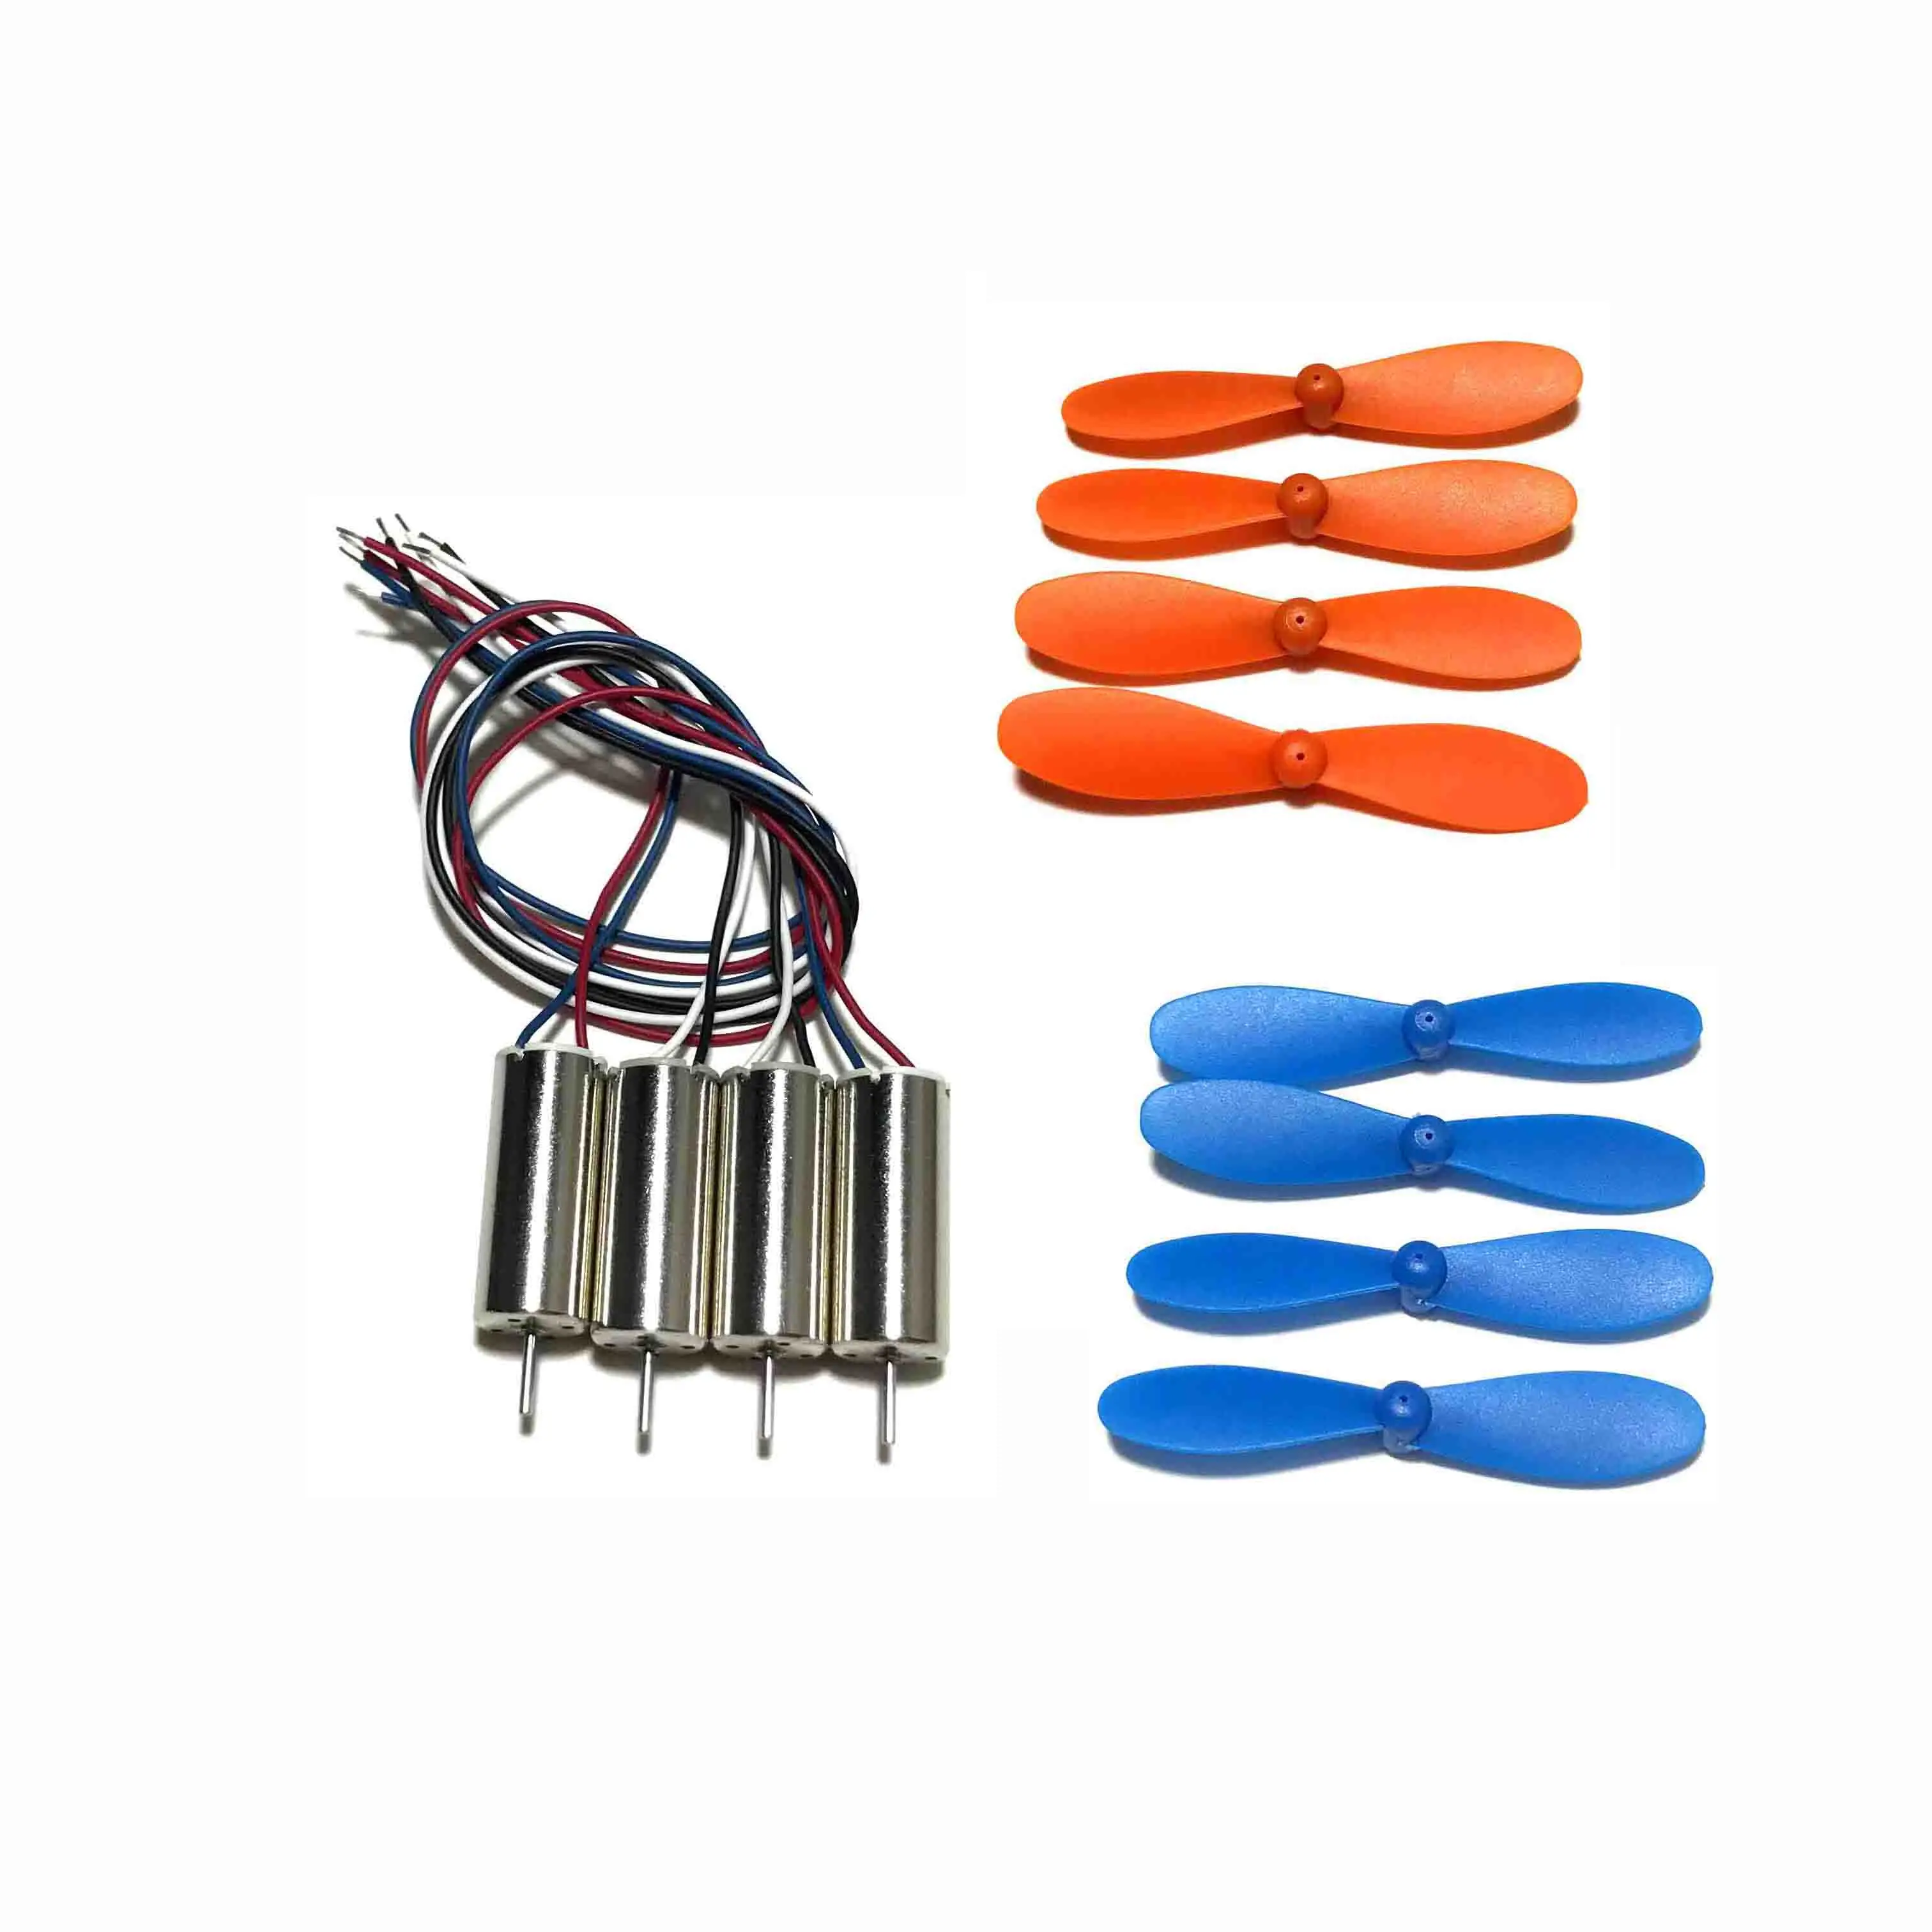 

4DRC V8 Mini Drone Quadcopter Spare Part Kit CW CCW Motor Engine Propeller Blade Wing 4D-V8 Replacement Accessory